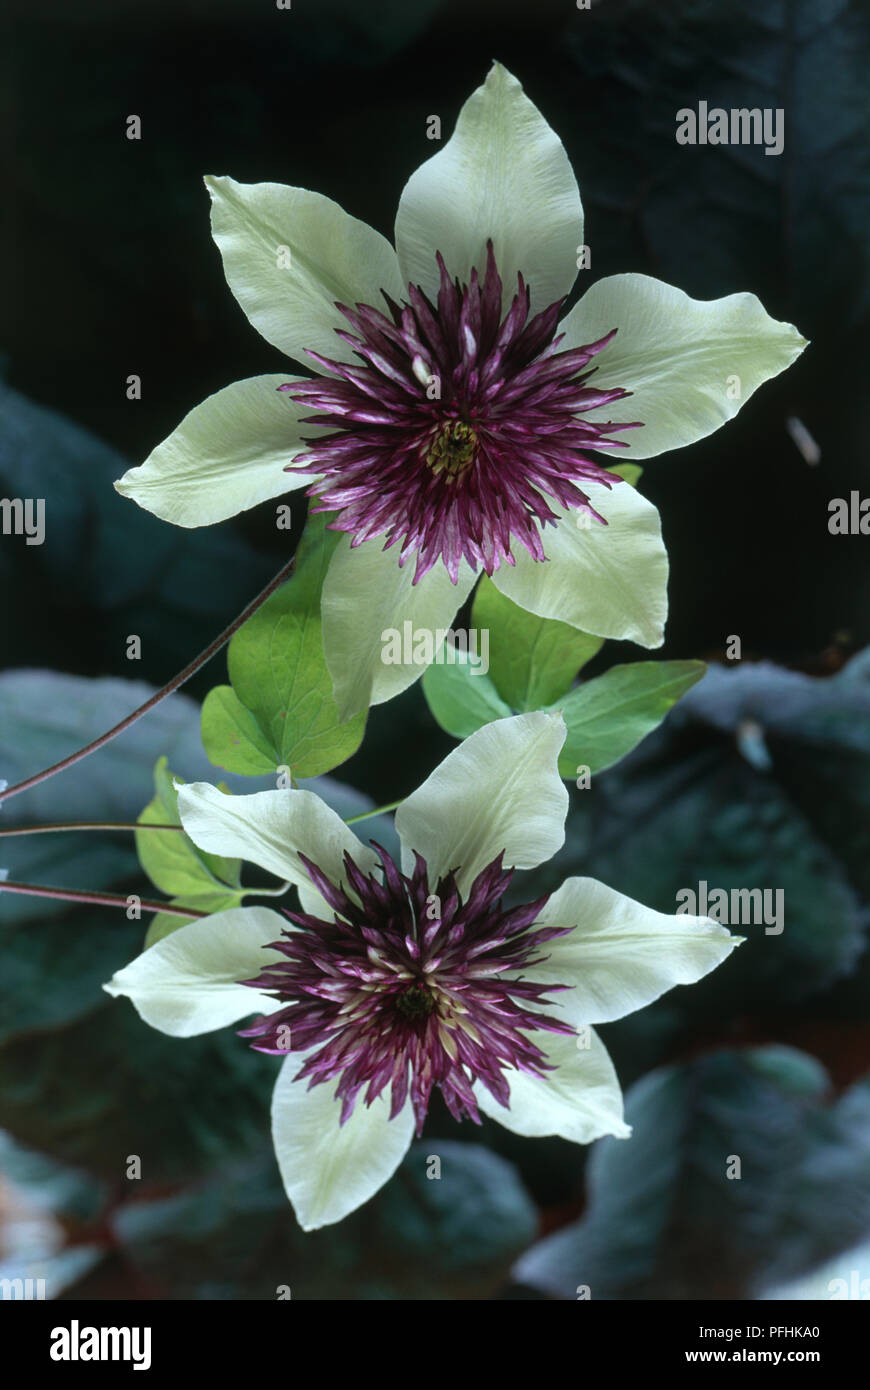 Clematis florida 'Sieboldii', two purple and pale yellow flower heads, close-up Stock Photo